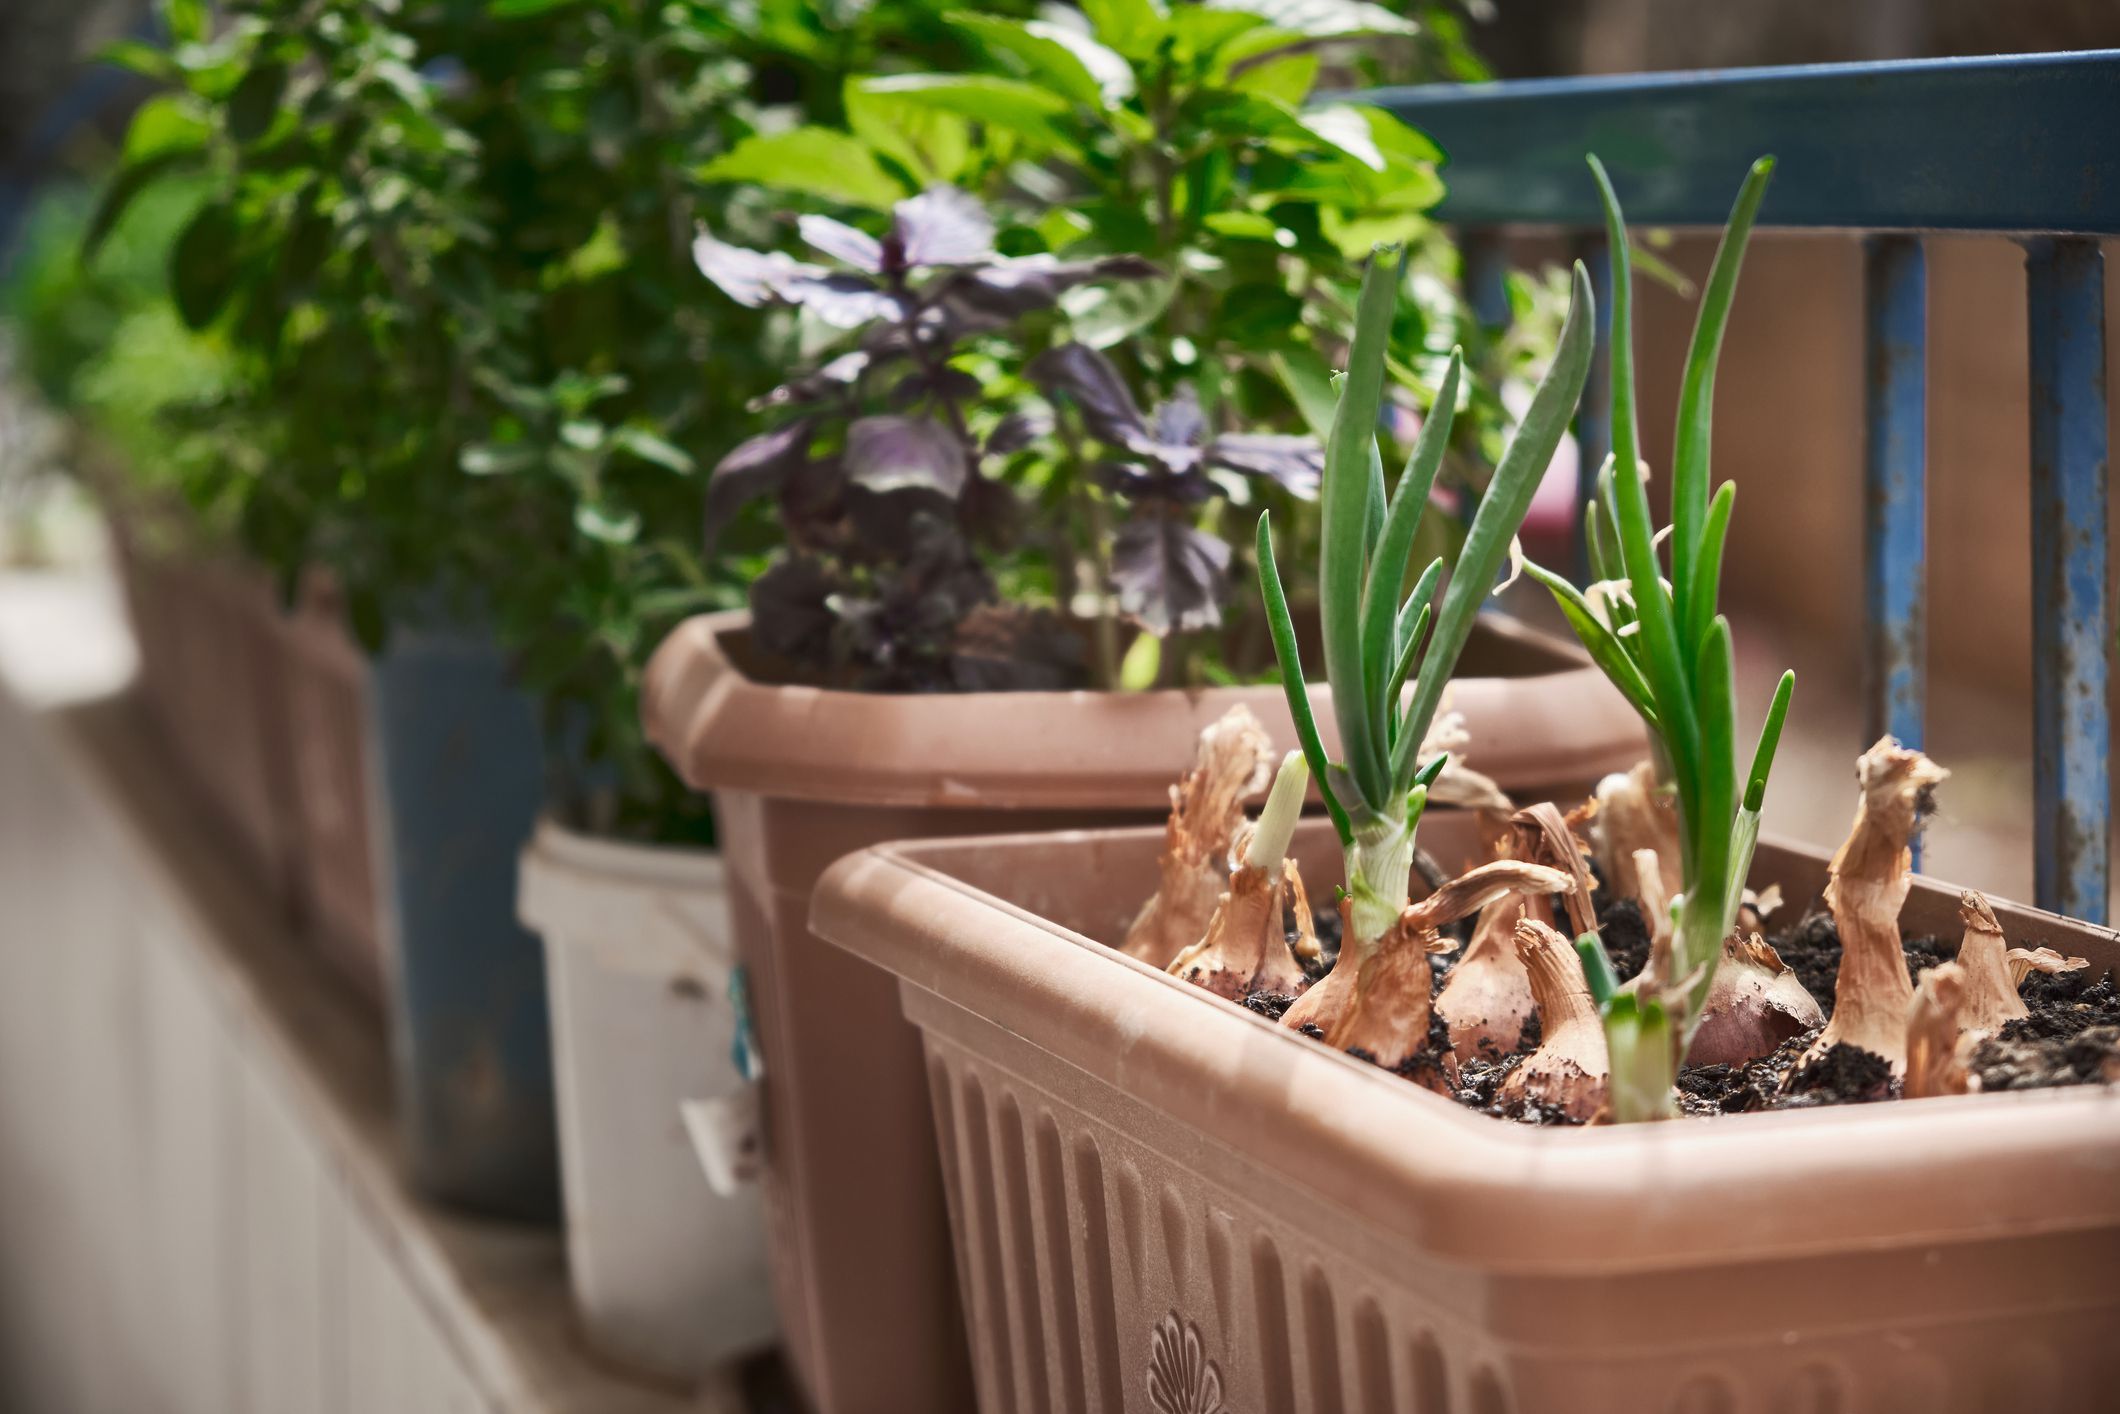 What Are Some Good Varieties Of Onions For Growing In Pots